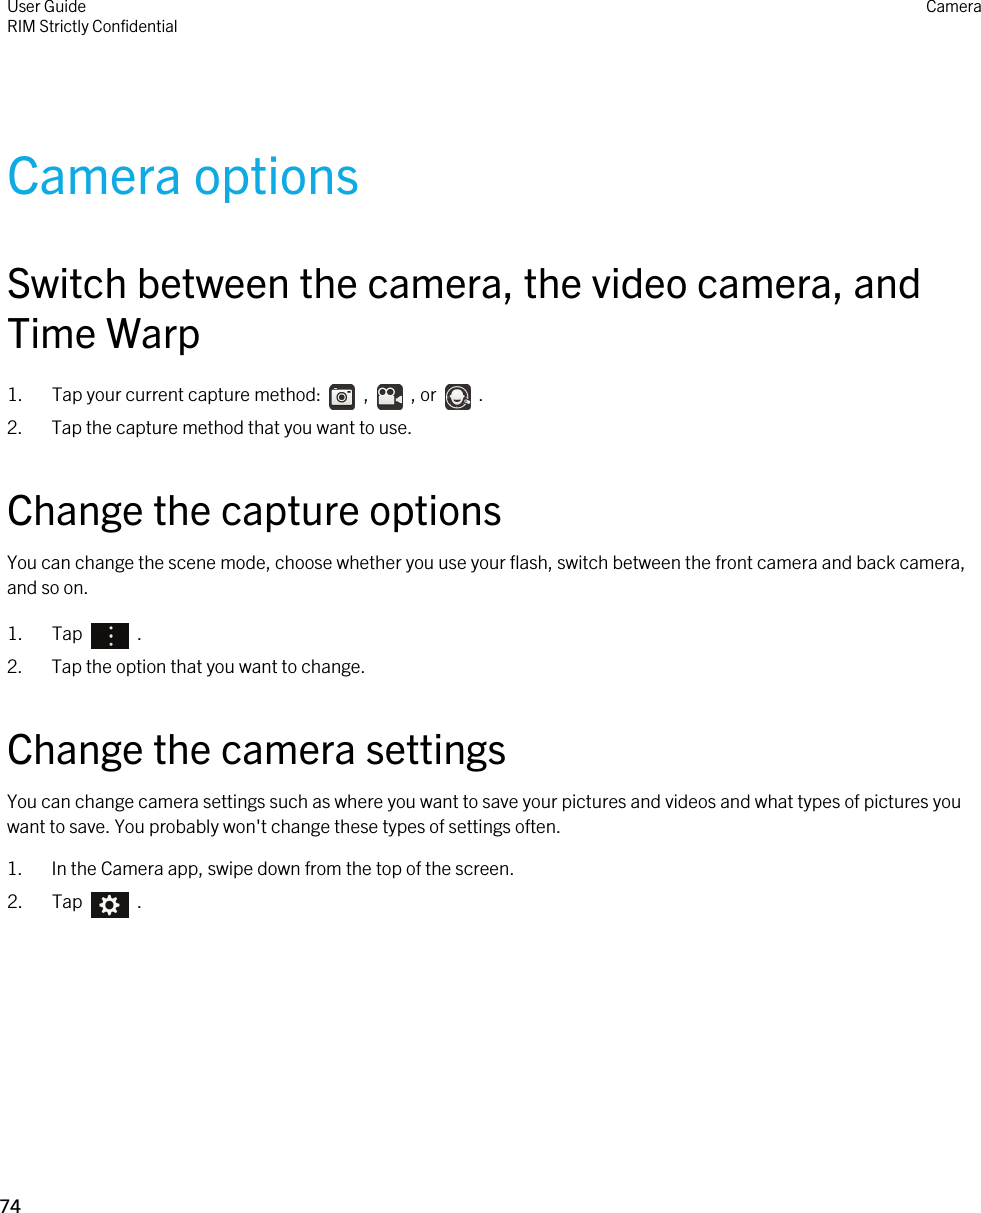 Camera optionsSwitch between the camera, the video camera, and Time Warp1.  Tap your current capture method:    ,    , or    .2. Tap the capture method that you want to use.Change the capture optionsYou can change the scene mode, choose whether you use your flash, switch between the front camera and back camera, and so on.1.  Tap    .2. Tap the option that you want to change.Change the camera settingsYou can change camera settings such as where you want to save your pictures and videos and what types of pictures you want to save. You probably won&apos;t change these types of settings often.1. In the Camera app, swipe down from the top of the screen.2.  Tap    .User GuideRIM Strictly ConfidentialCamera74 